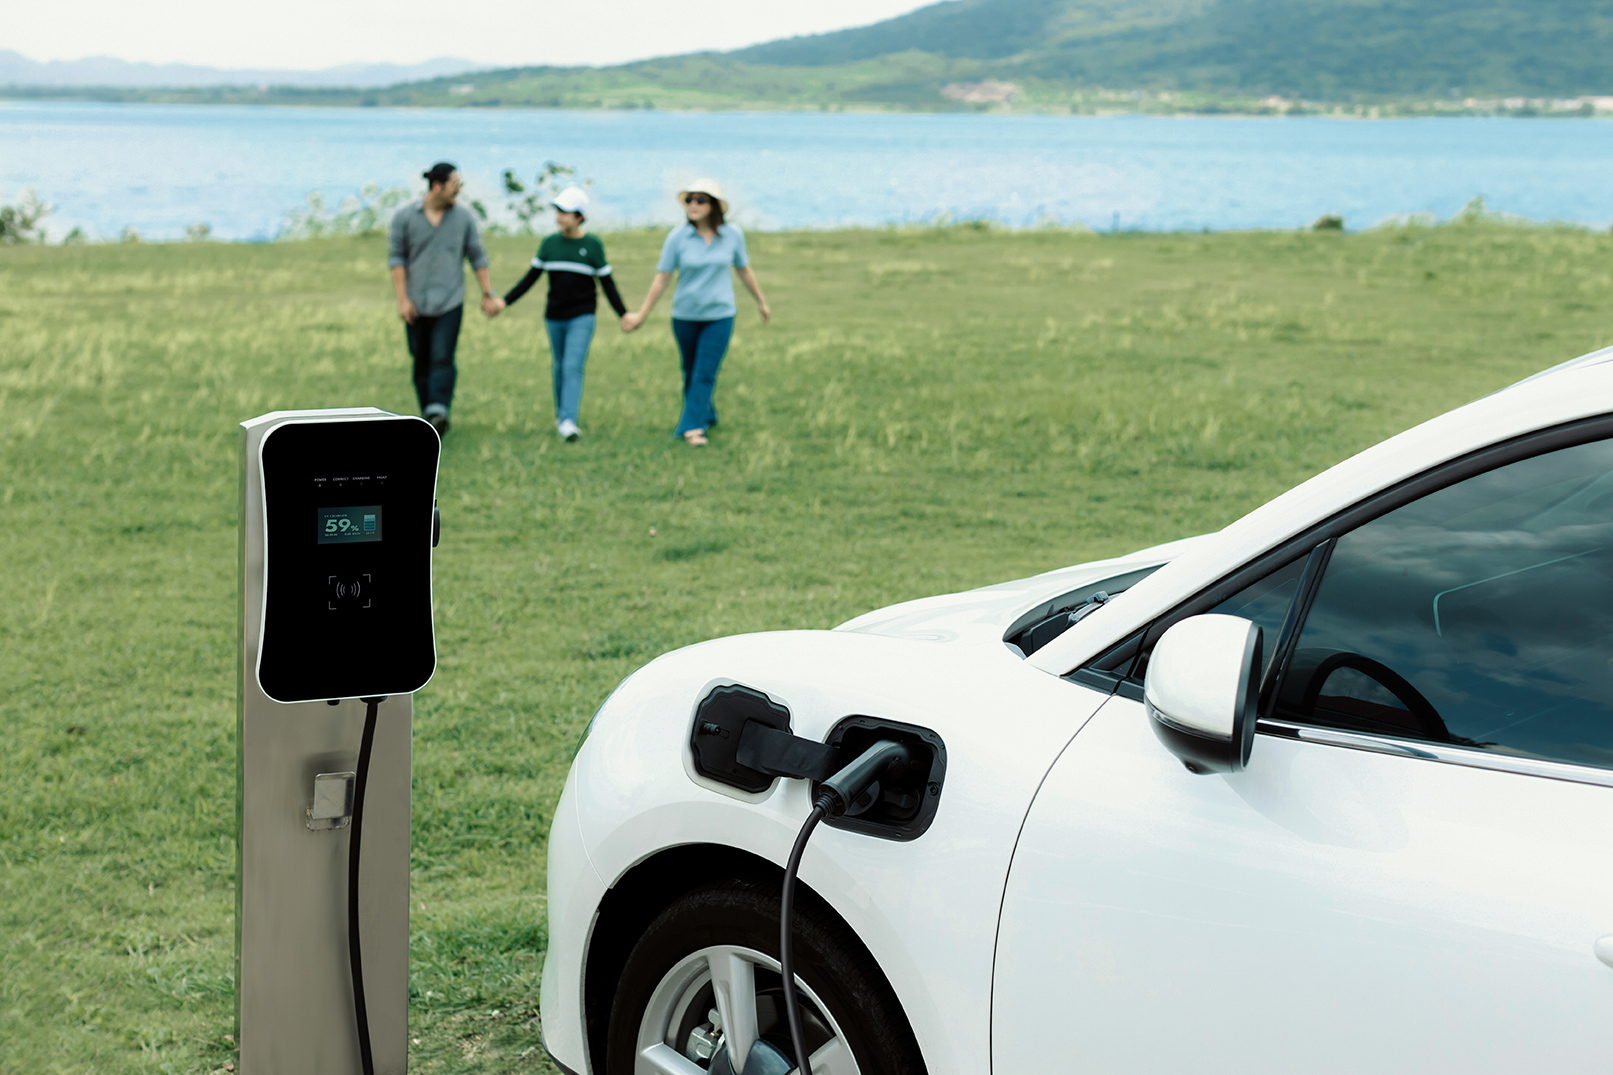 Utilize The ODOT Community Charging Rebate To Fund Your Oregon EV